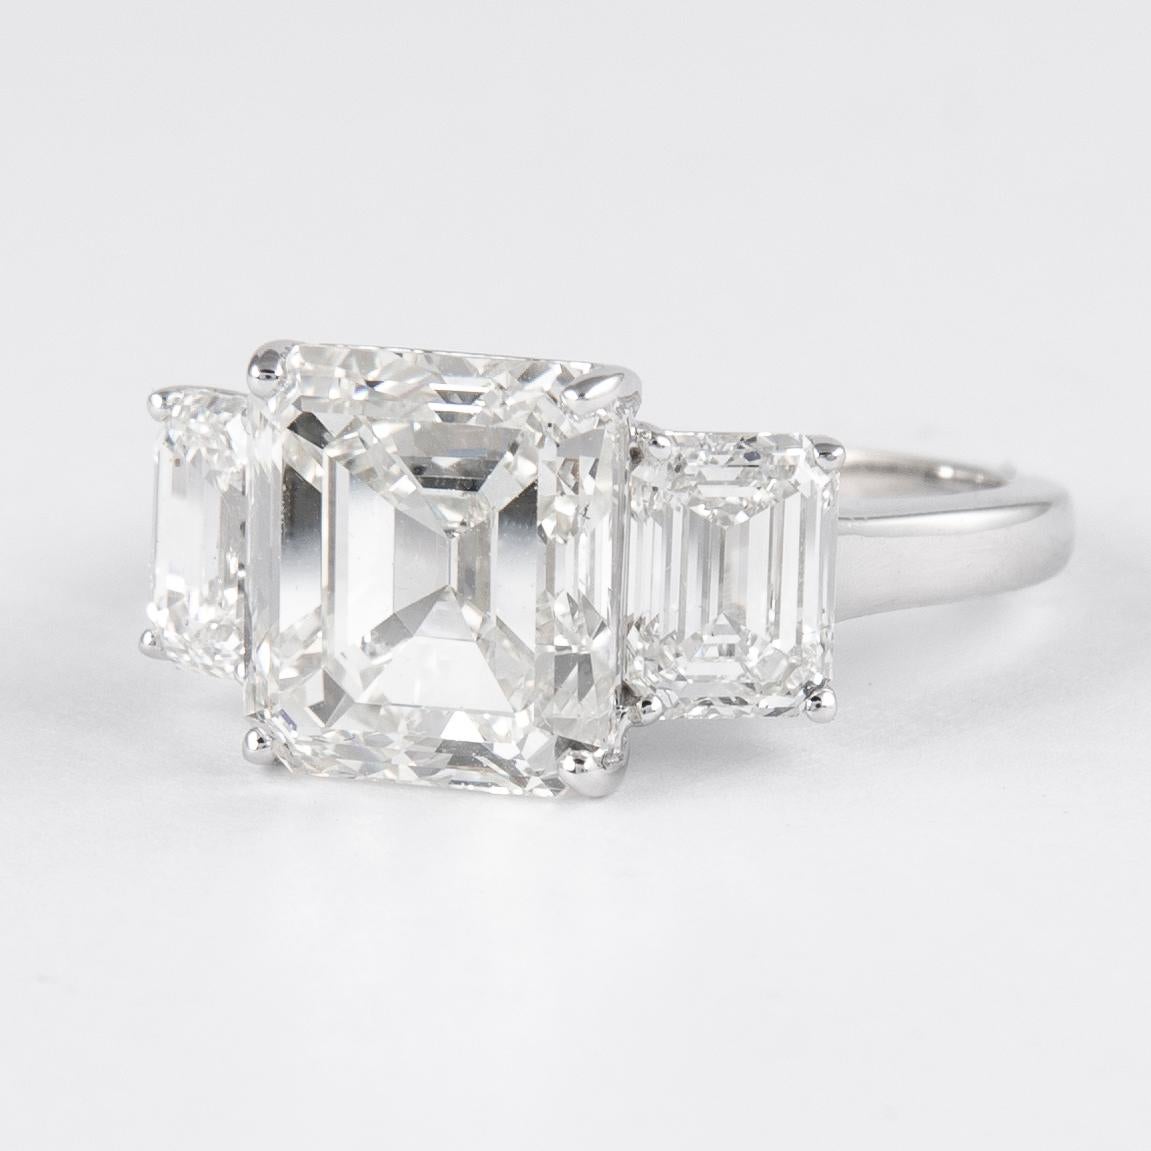 Modern Alexander All GIA Certified 5.04ct with 2.02ct Emerald Cut Diamonds Ring 18k